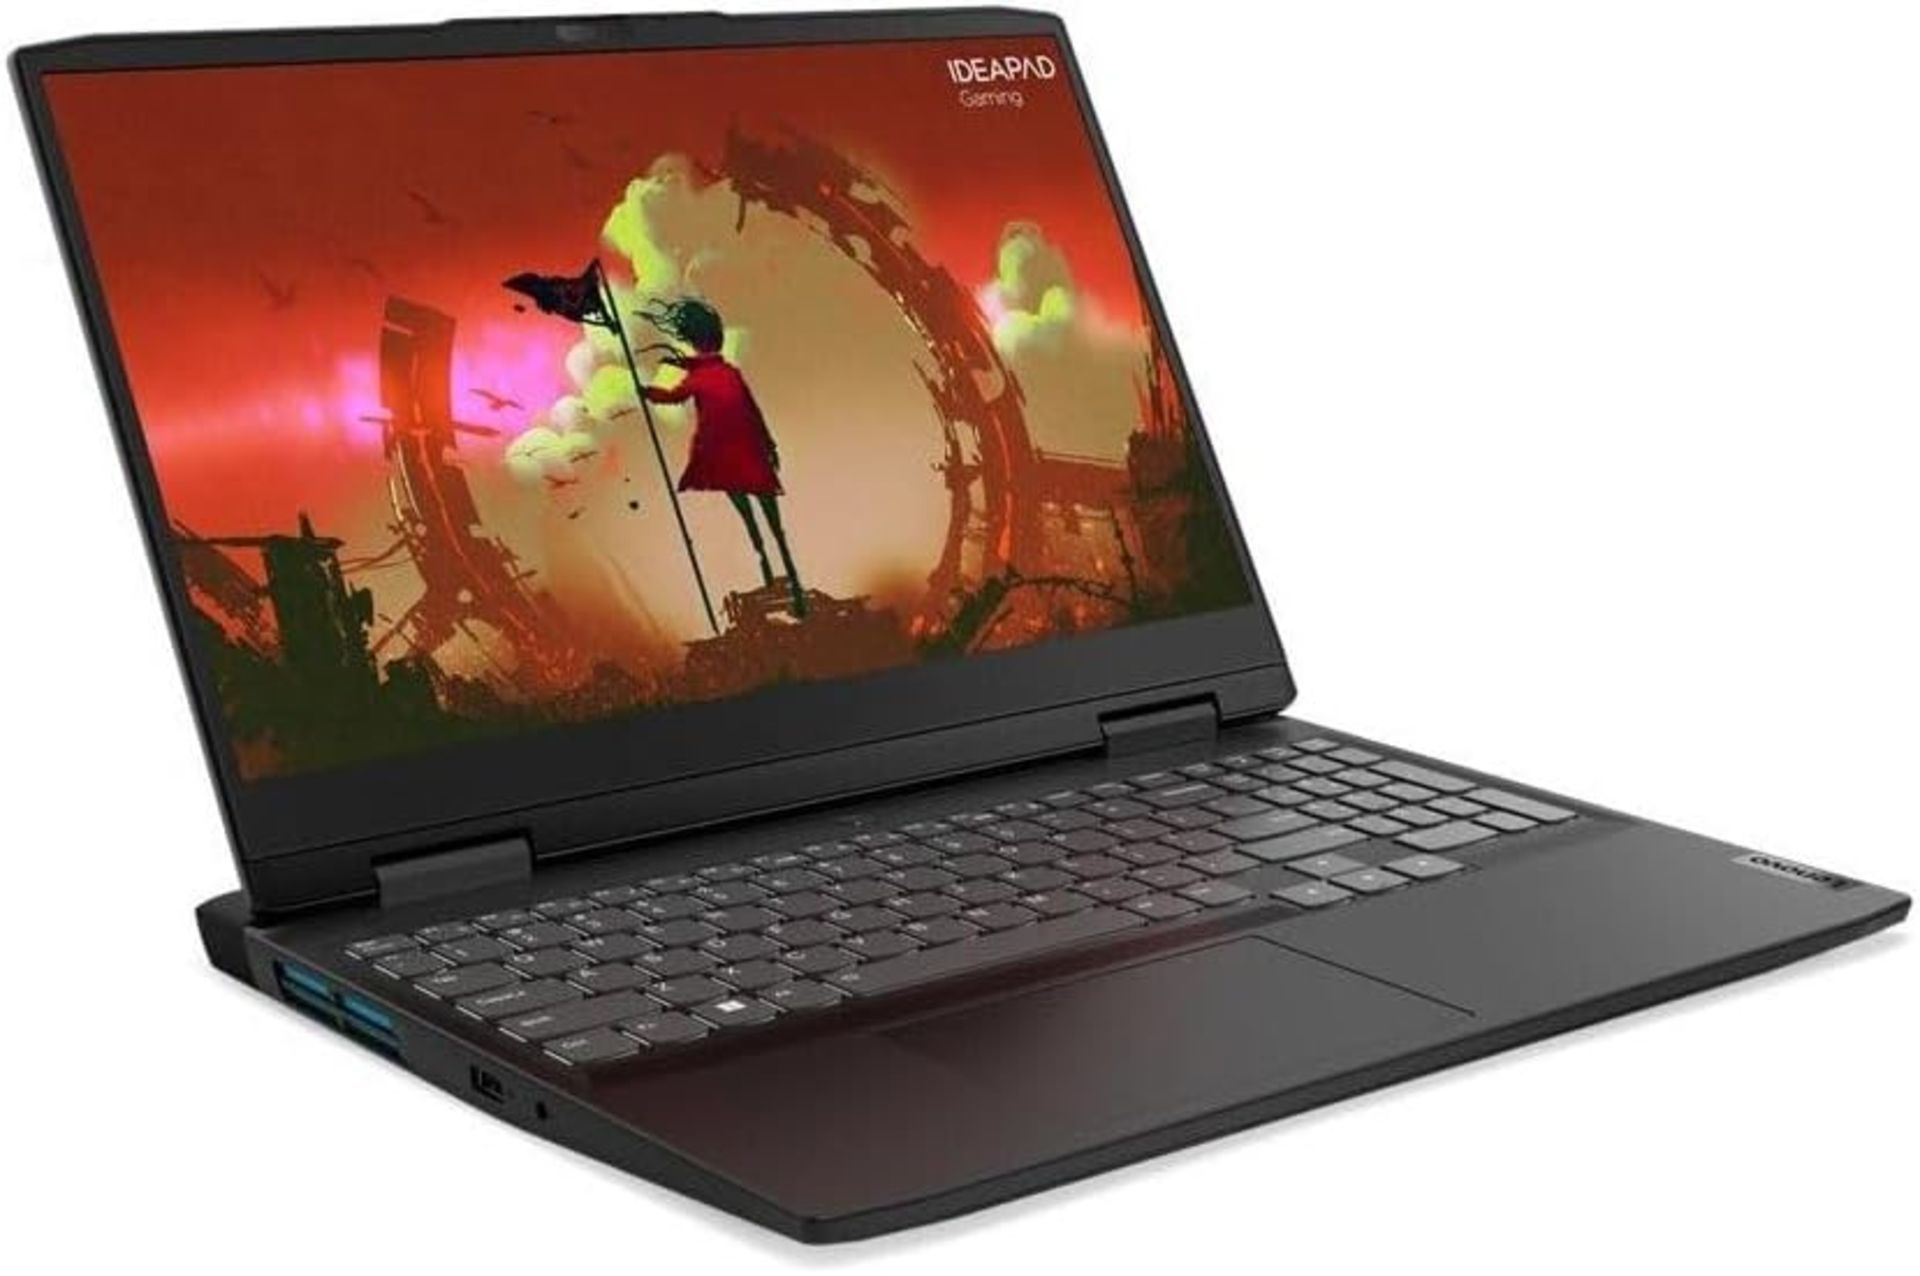 BRAND NEW FACTORY SEALED LENOVO IdeaPad Gaming 3 15ARH7 Laptop. RRP £997.88. Screen: 15.6 Inch - Image 2 of 5